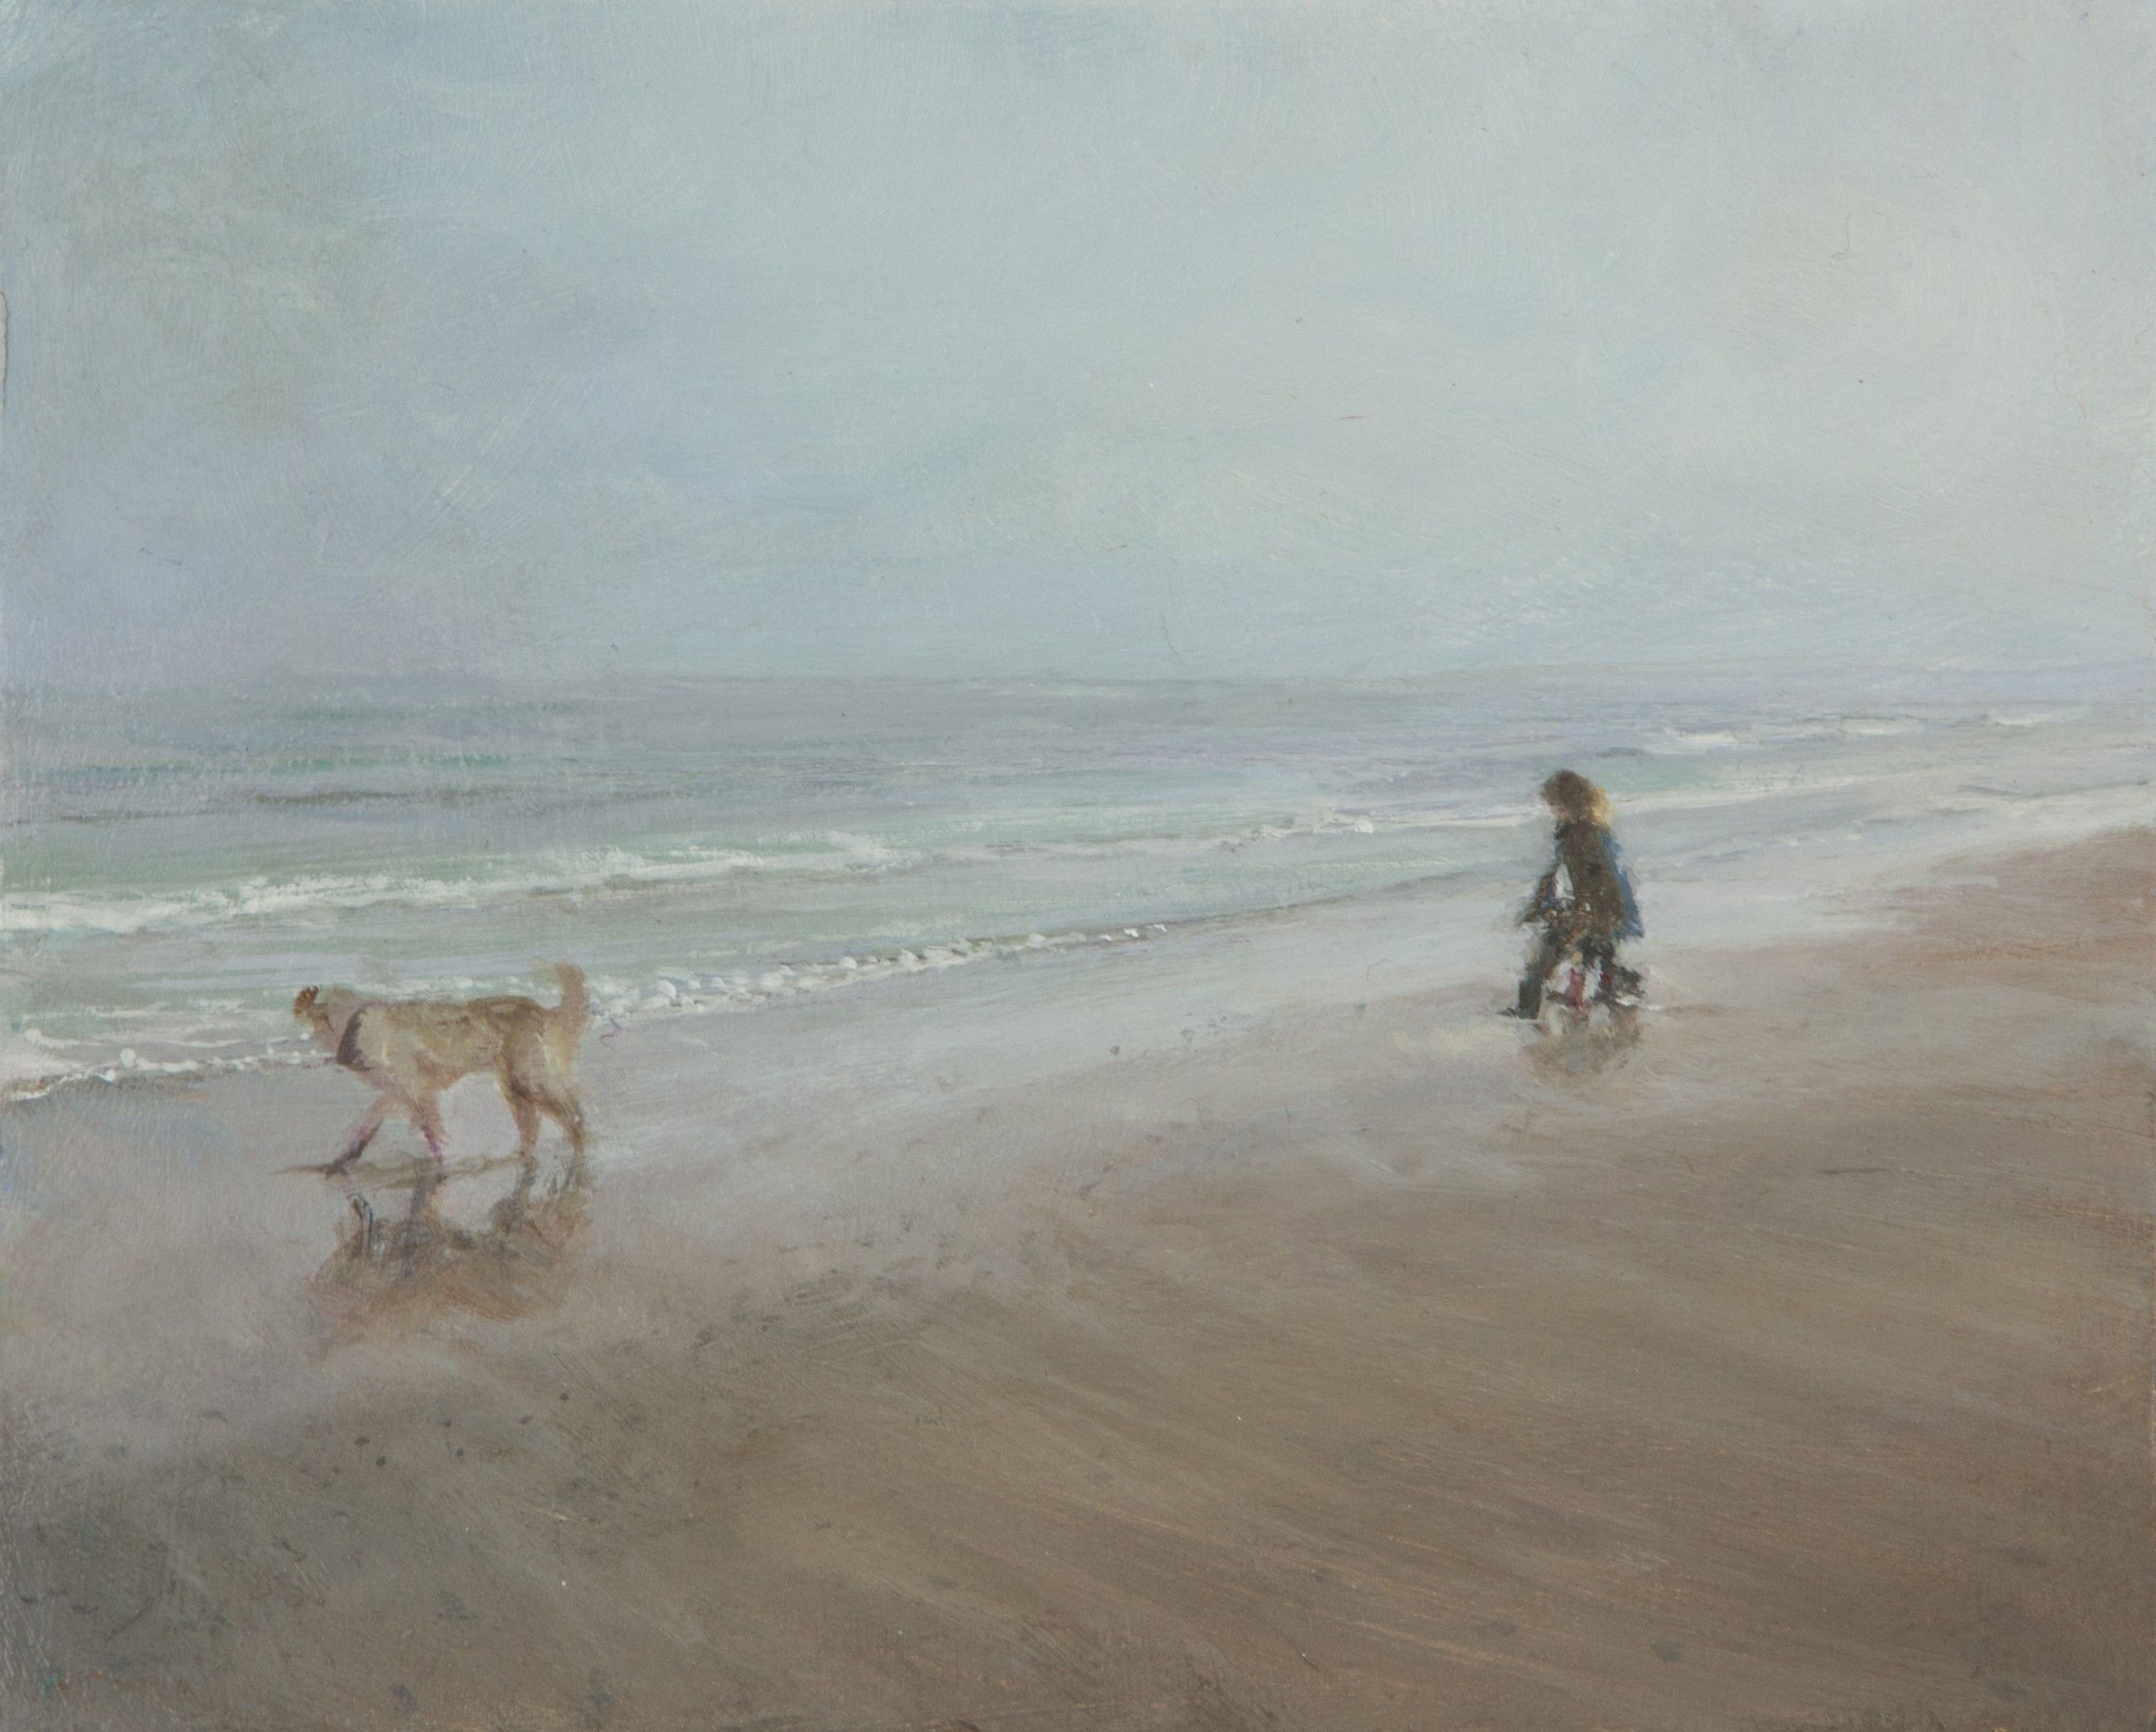 J and P with the dog, Holkham by Sarah Spencer